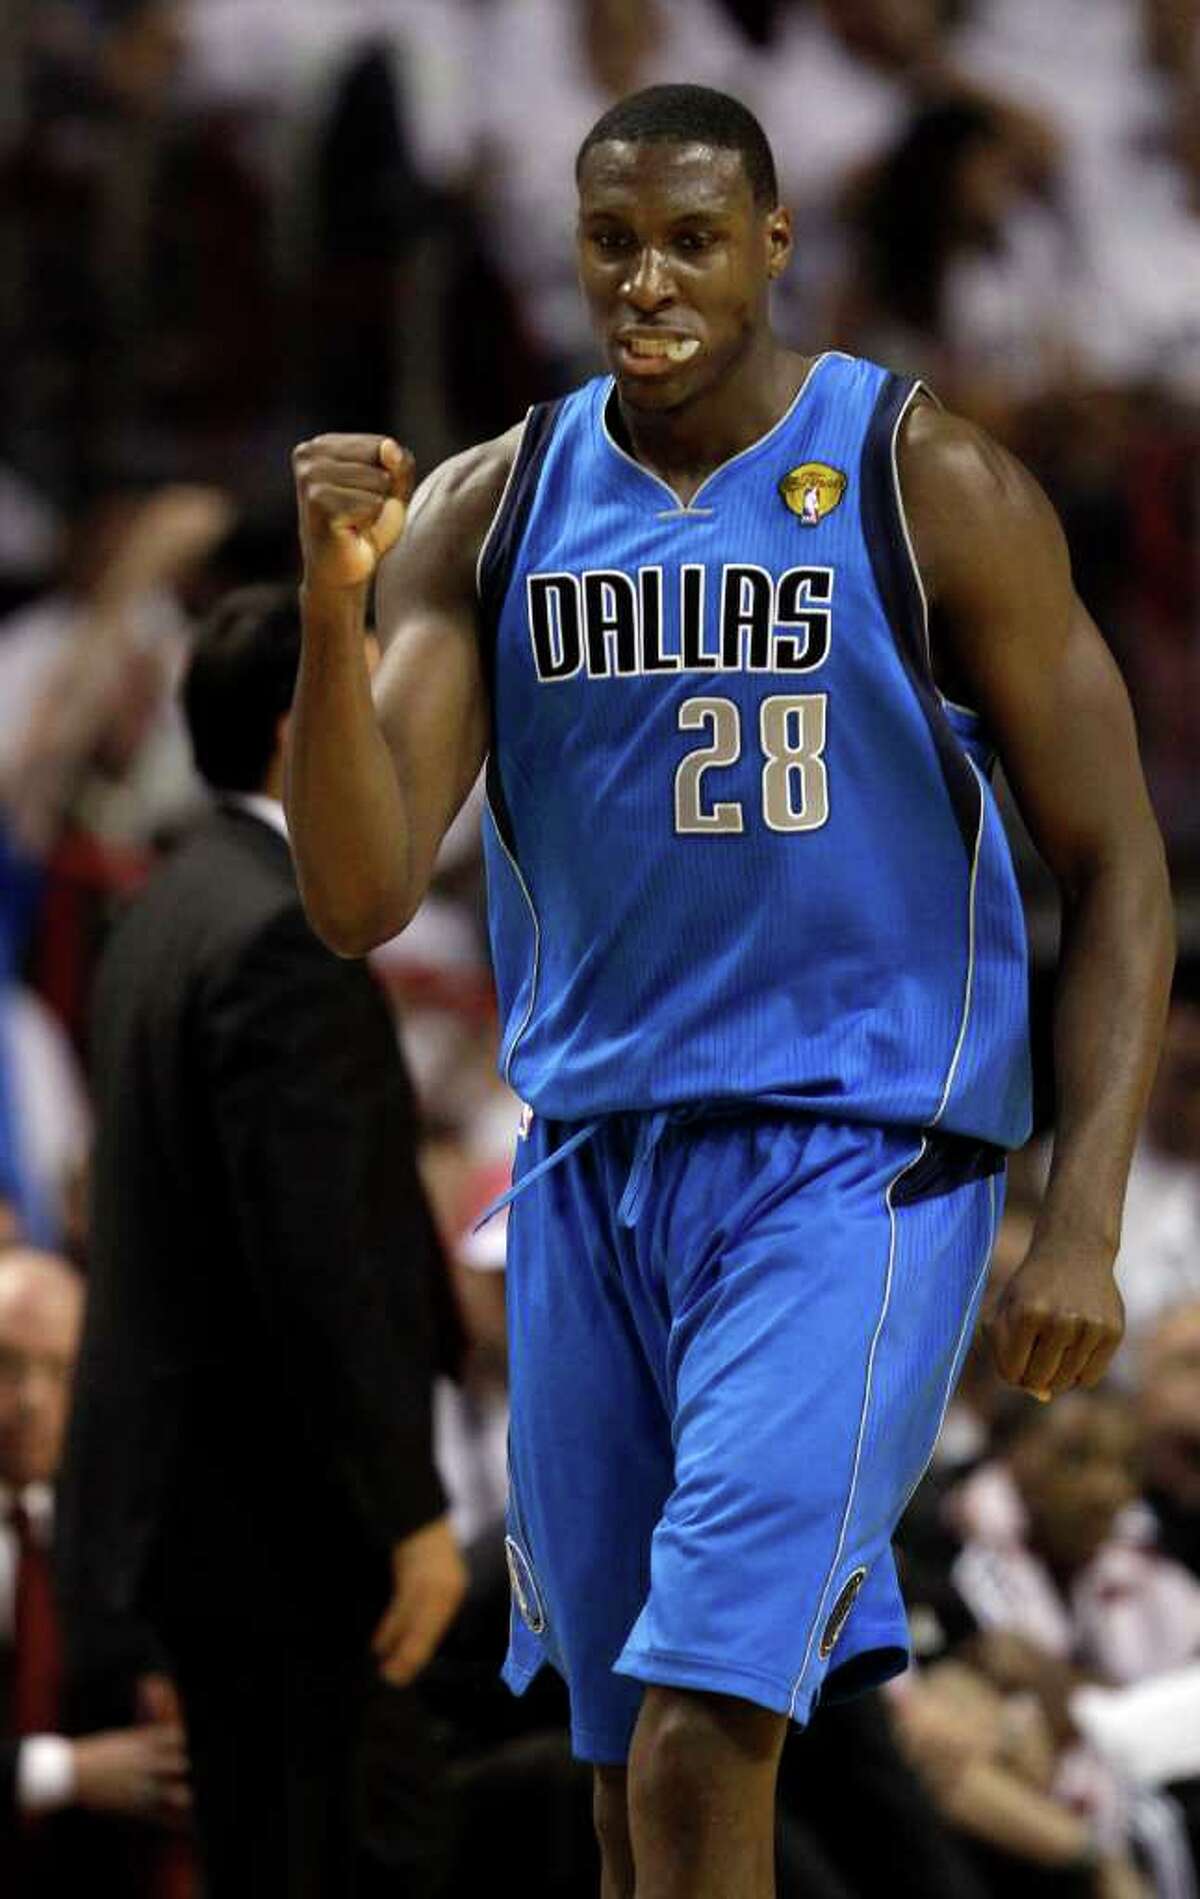 Dallas Mavericks' Ian Mahinmi reacts during the second half of Game 6 of the NBA Finals basketball game against the Miami Heat Sunday, June 12, 2011, in Miami.